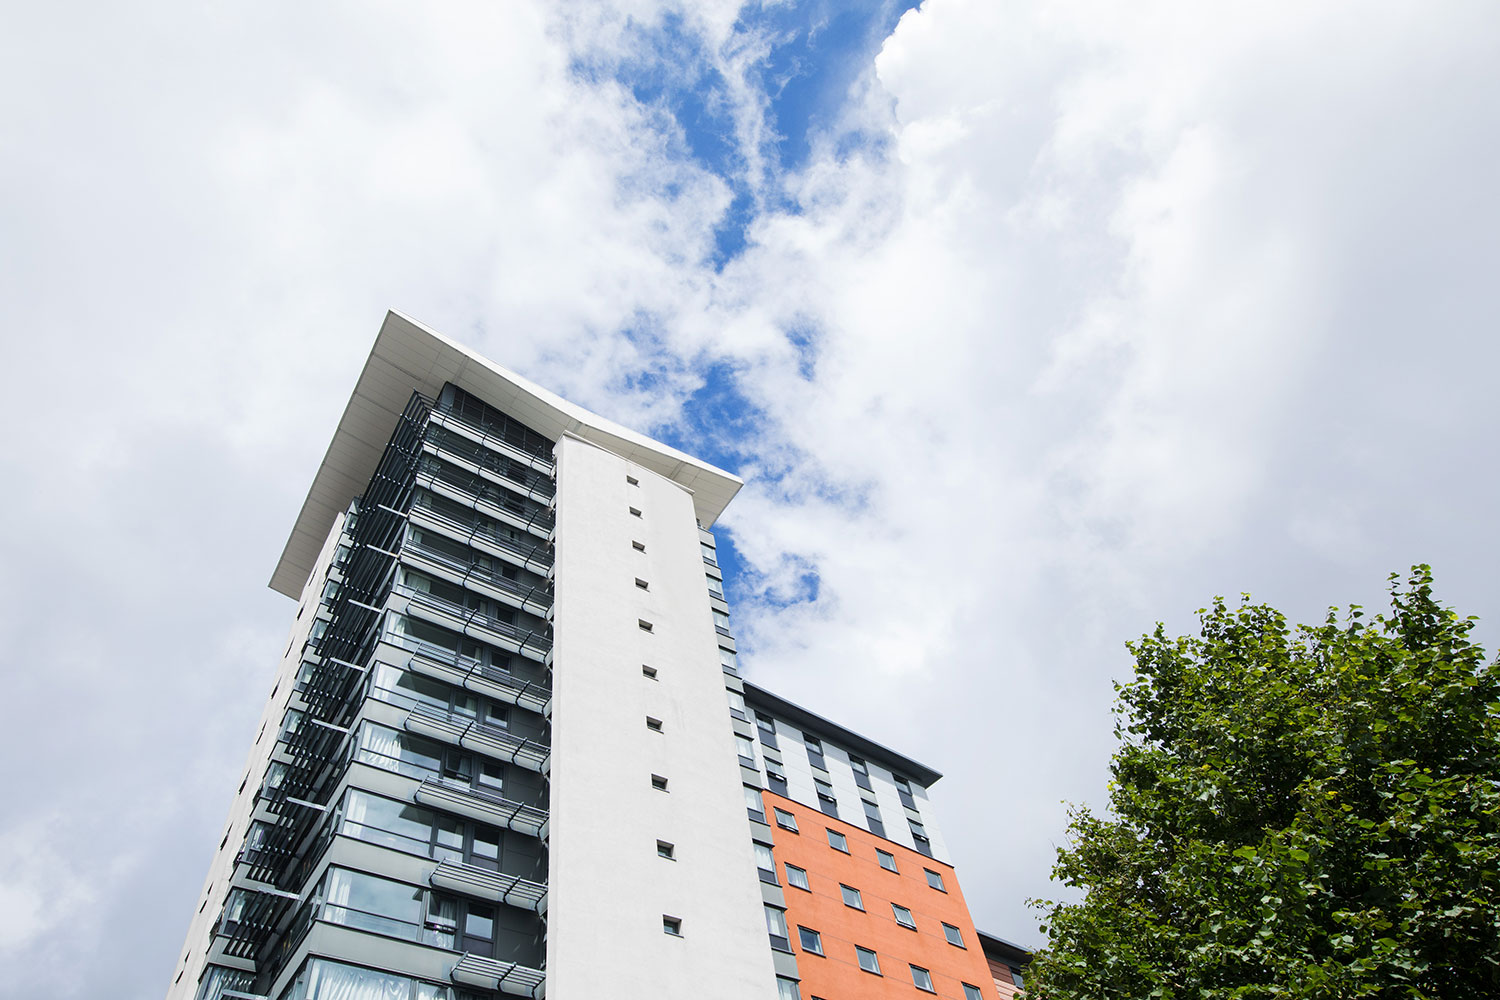 Unite Students accommodation at Mercury Point in Southampton